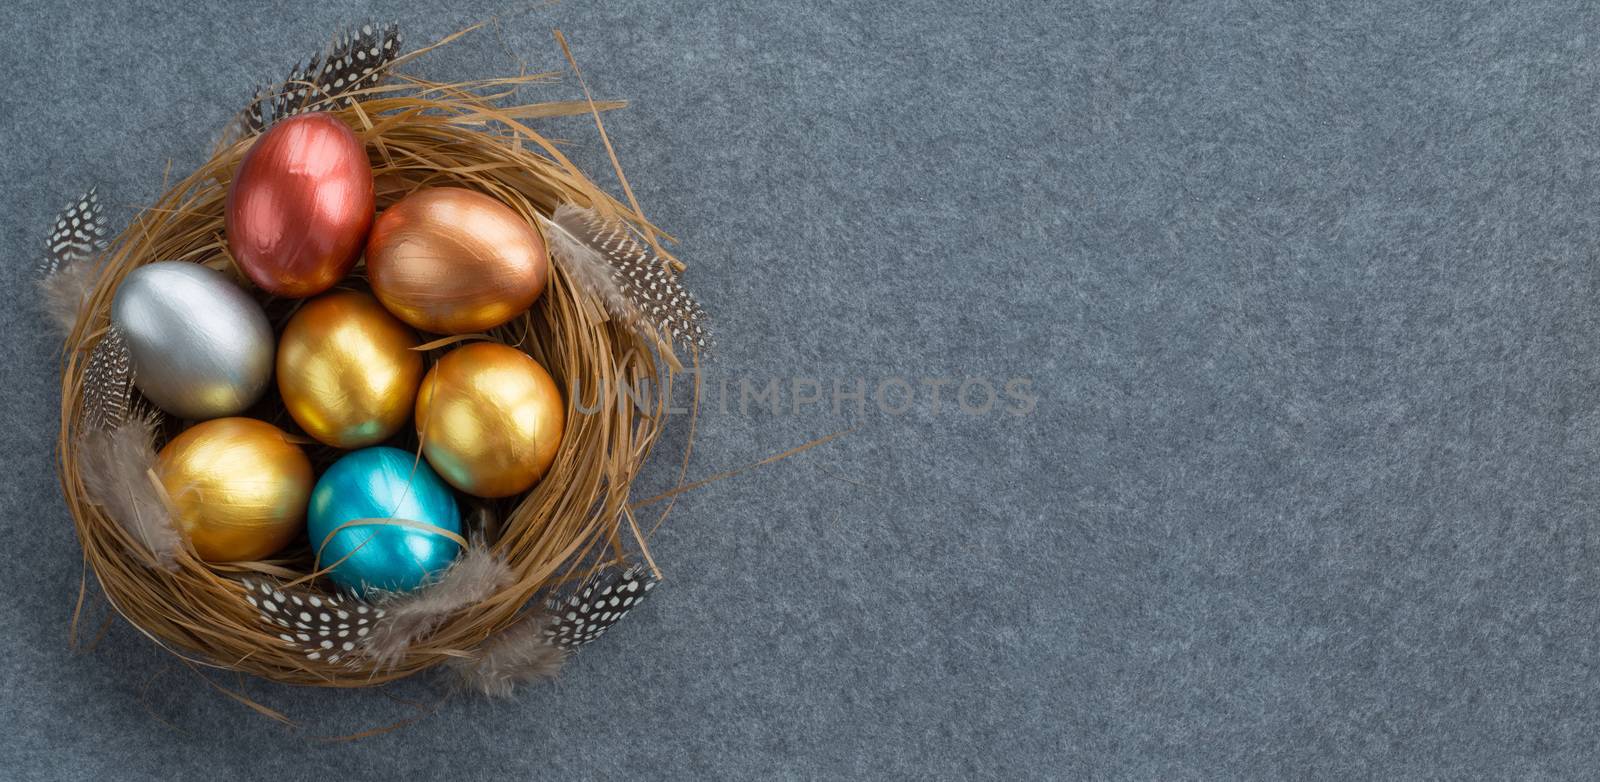 Happy Easter holiday greeting symbol stylish natural wooden grass nest with colorful quail eggs and feathers on gray fabric background with copy space for text